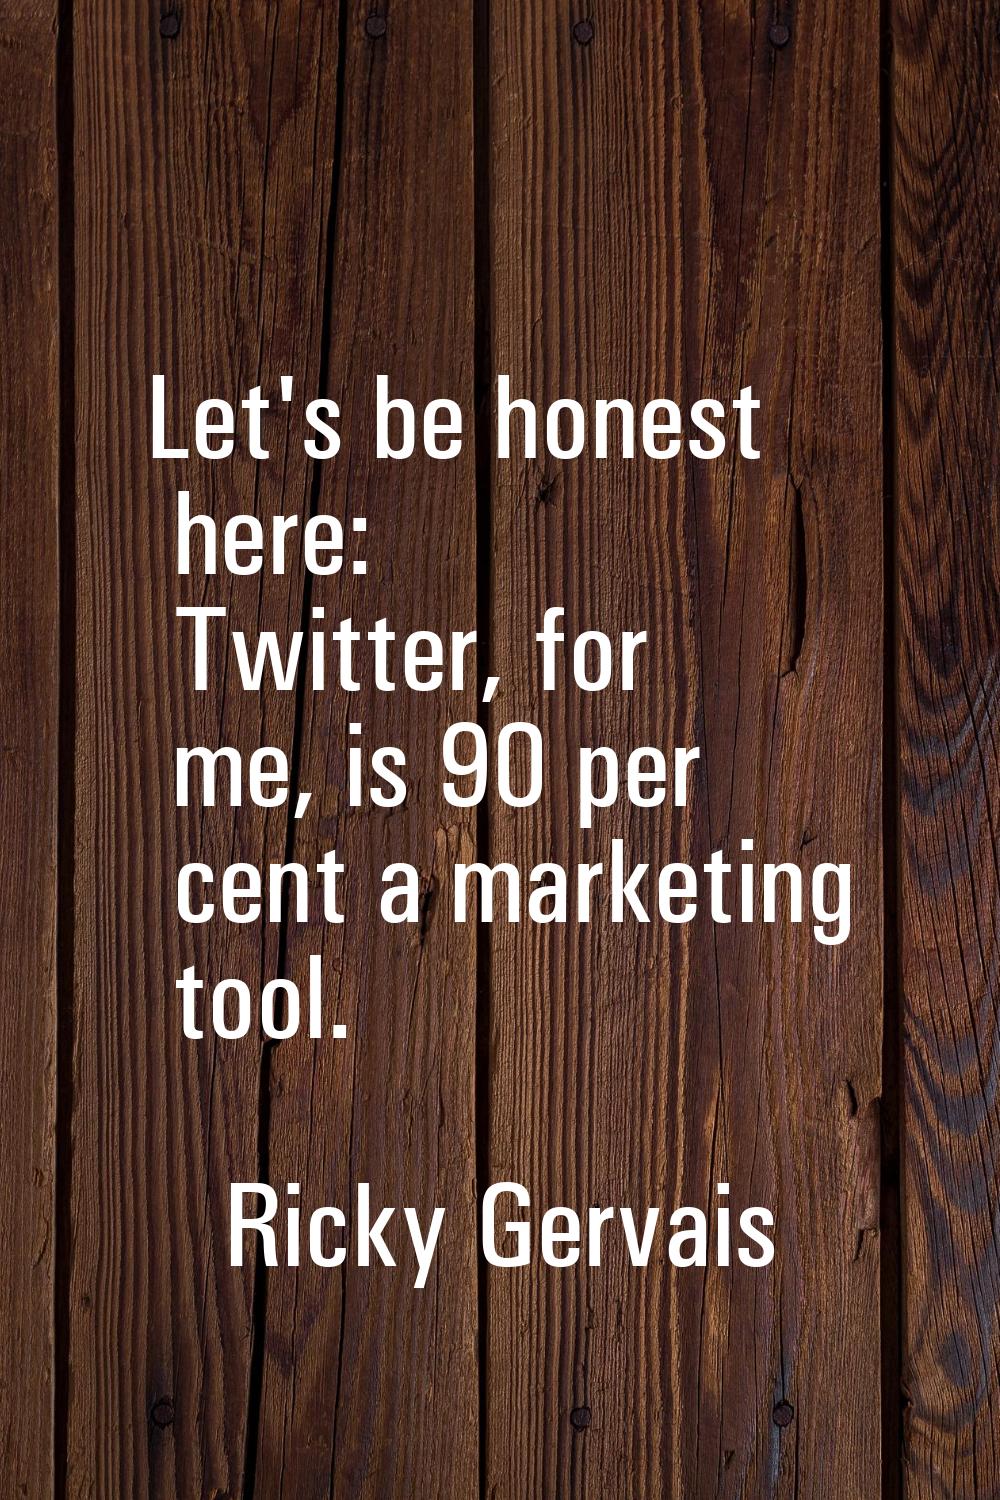 Let's be honest here: Twitter, for me, is 90 per cent a marketing tool.